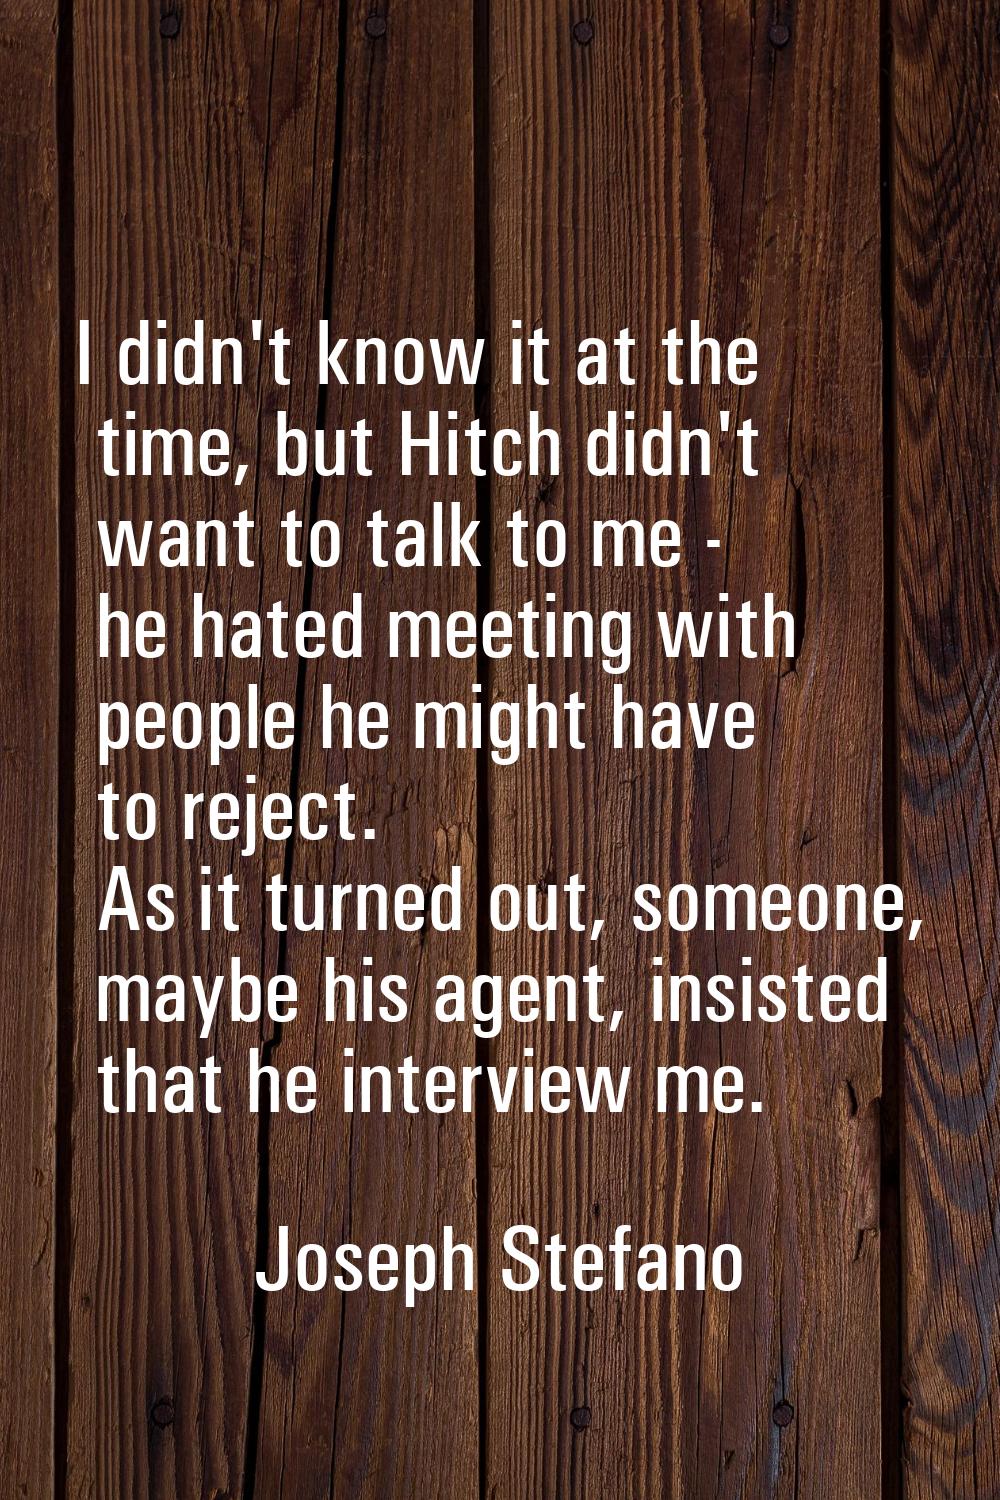 I didn't know it at the time, but Hitch didn't want to talk to me - he hated meeting with people he